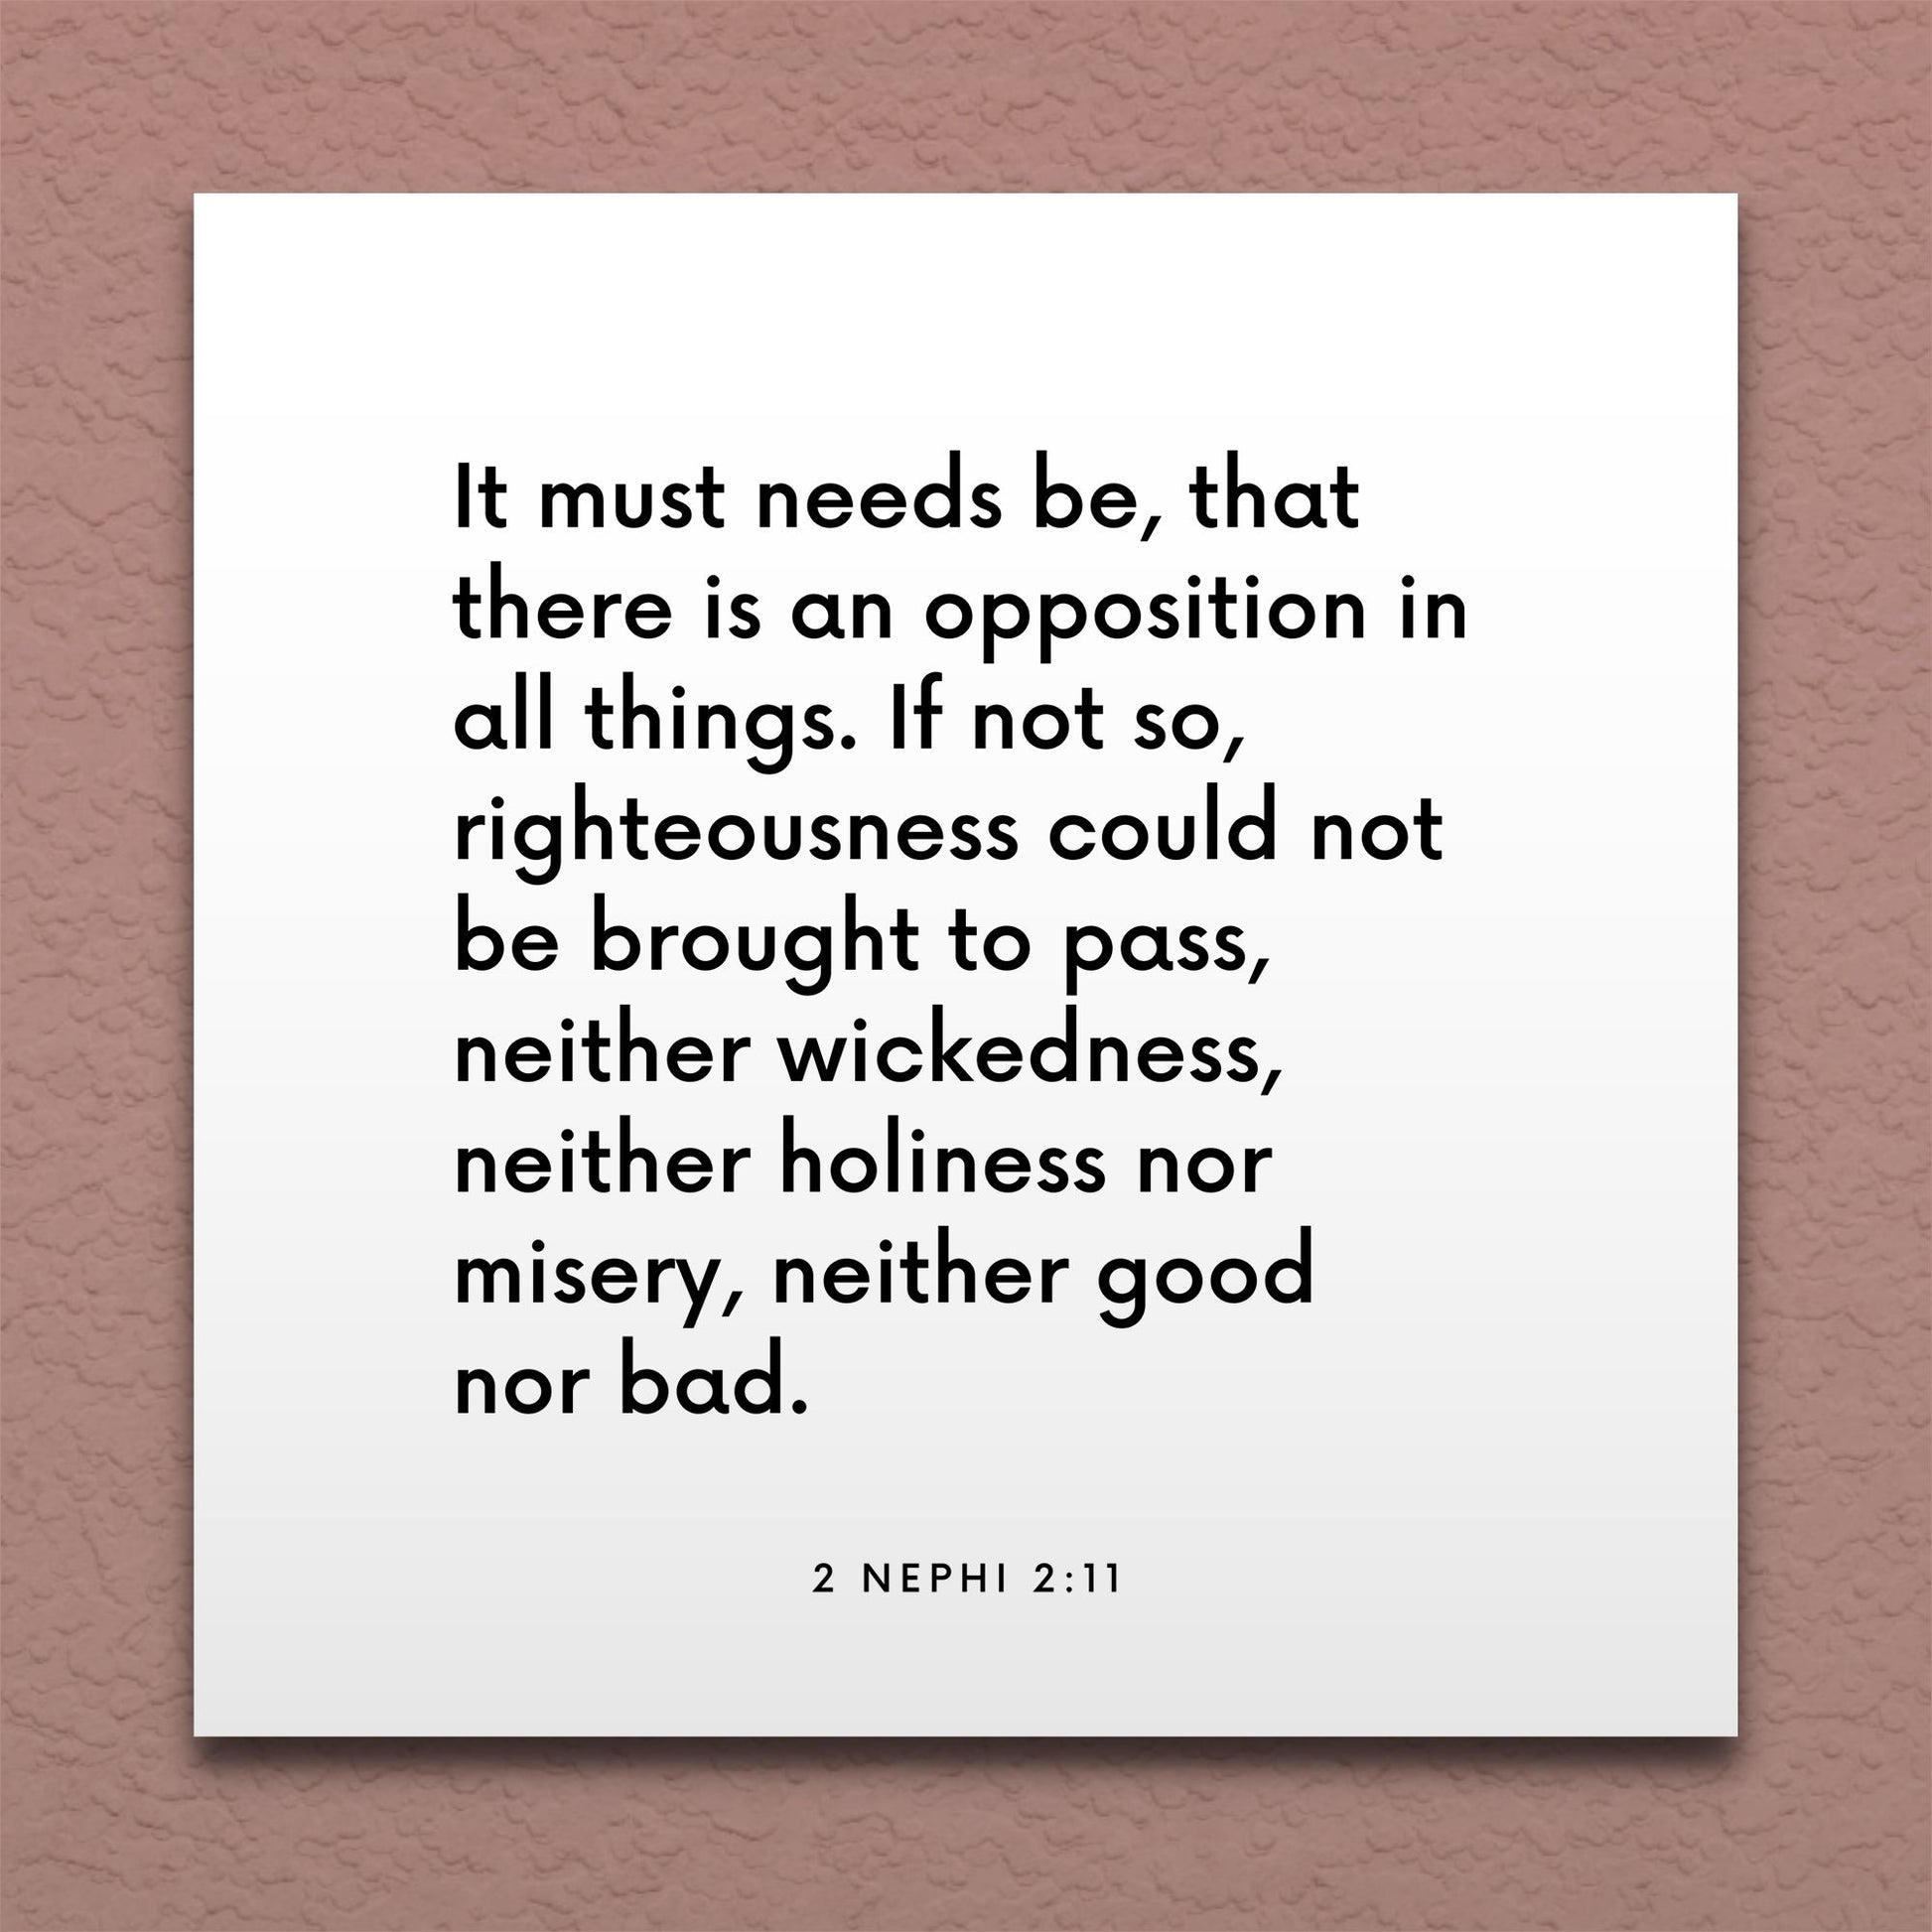 Wall-mounted scripture tile for 2 Nephi 2:11 - "It must needs be, that there is an opposition in all things"